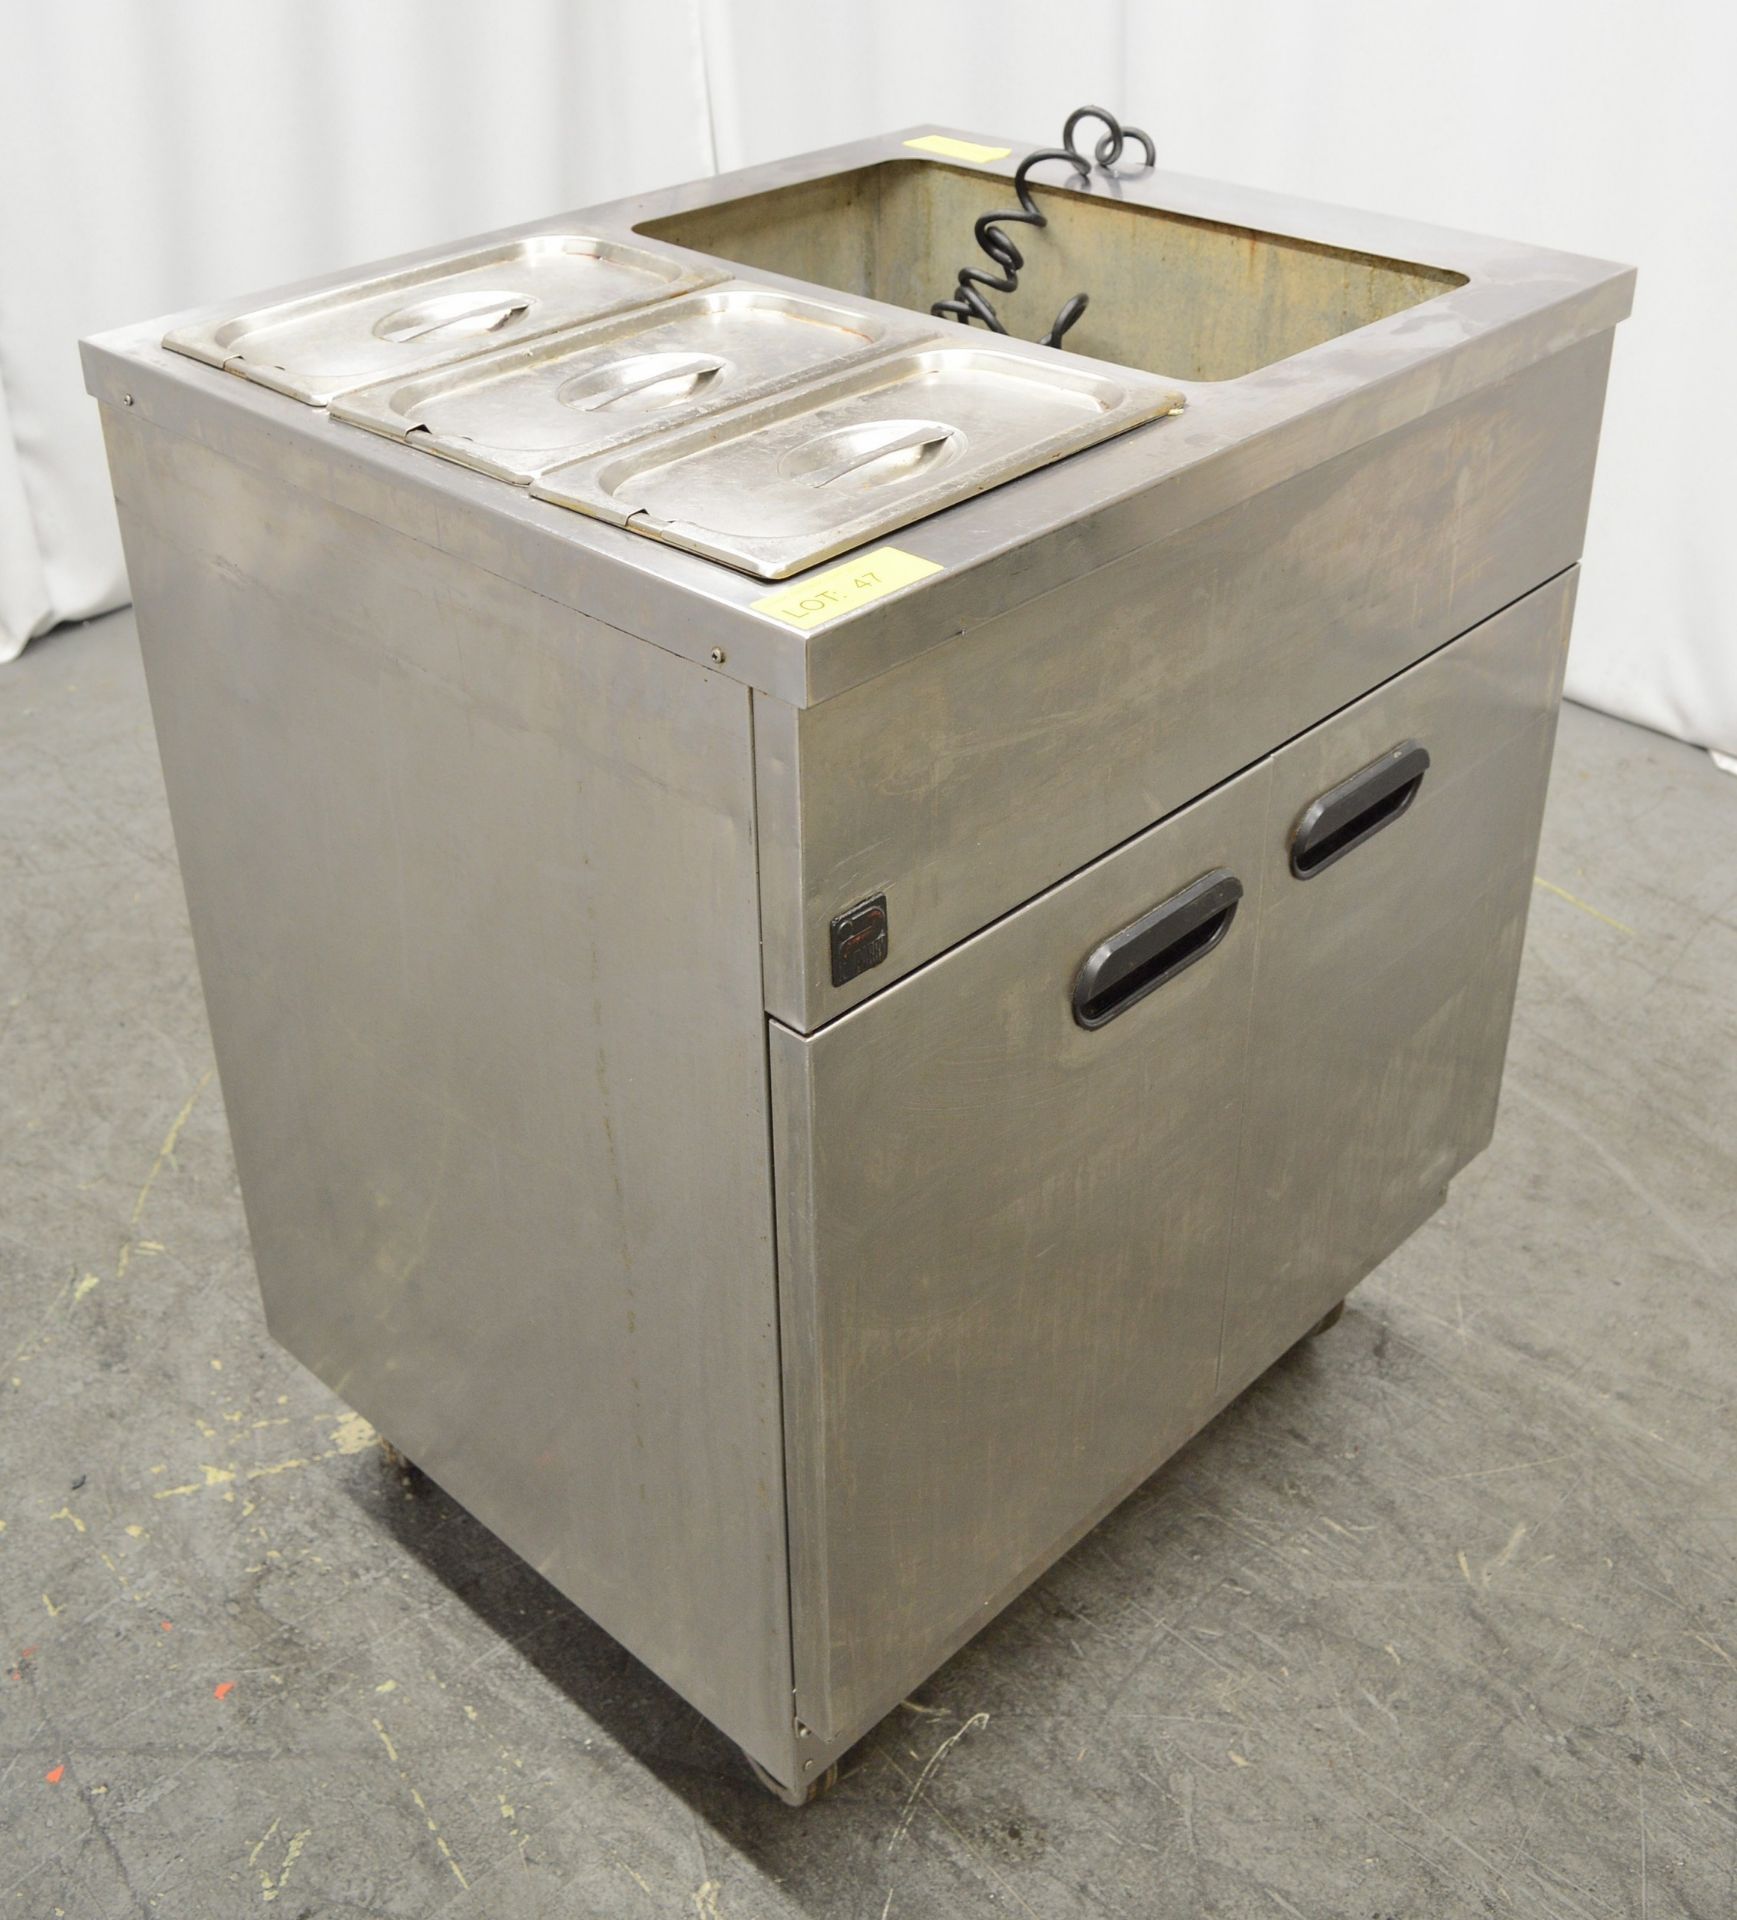 Parry Mobile Bain Marie and Warming Oven Single Phase W780 x D635mm. - Image 2 of 6